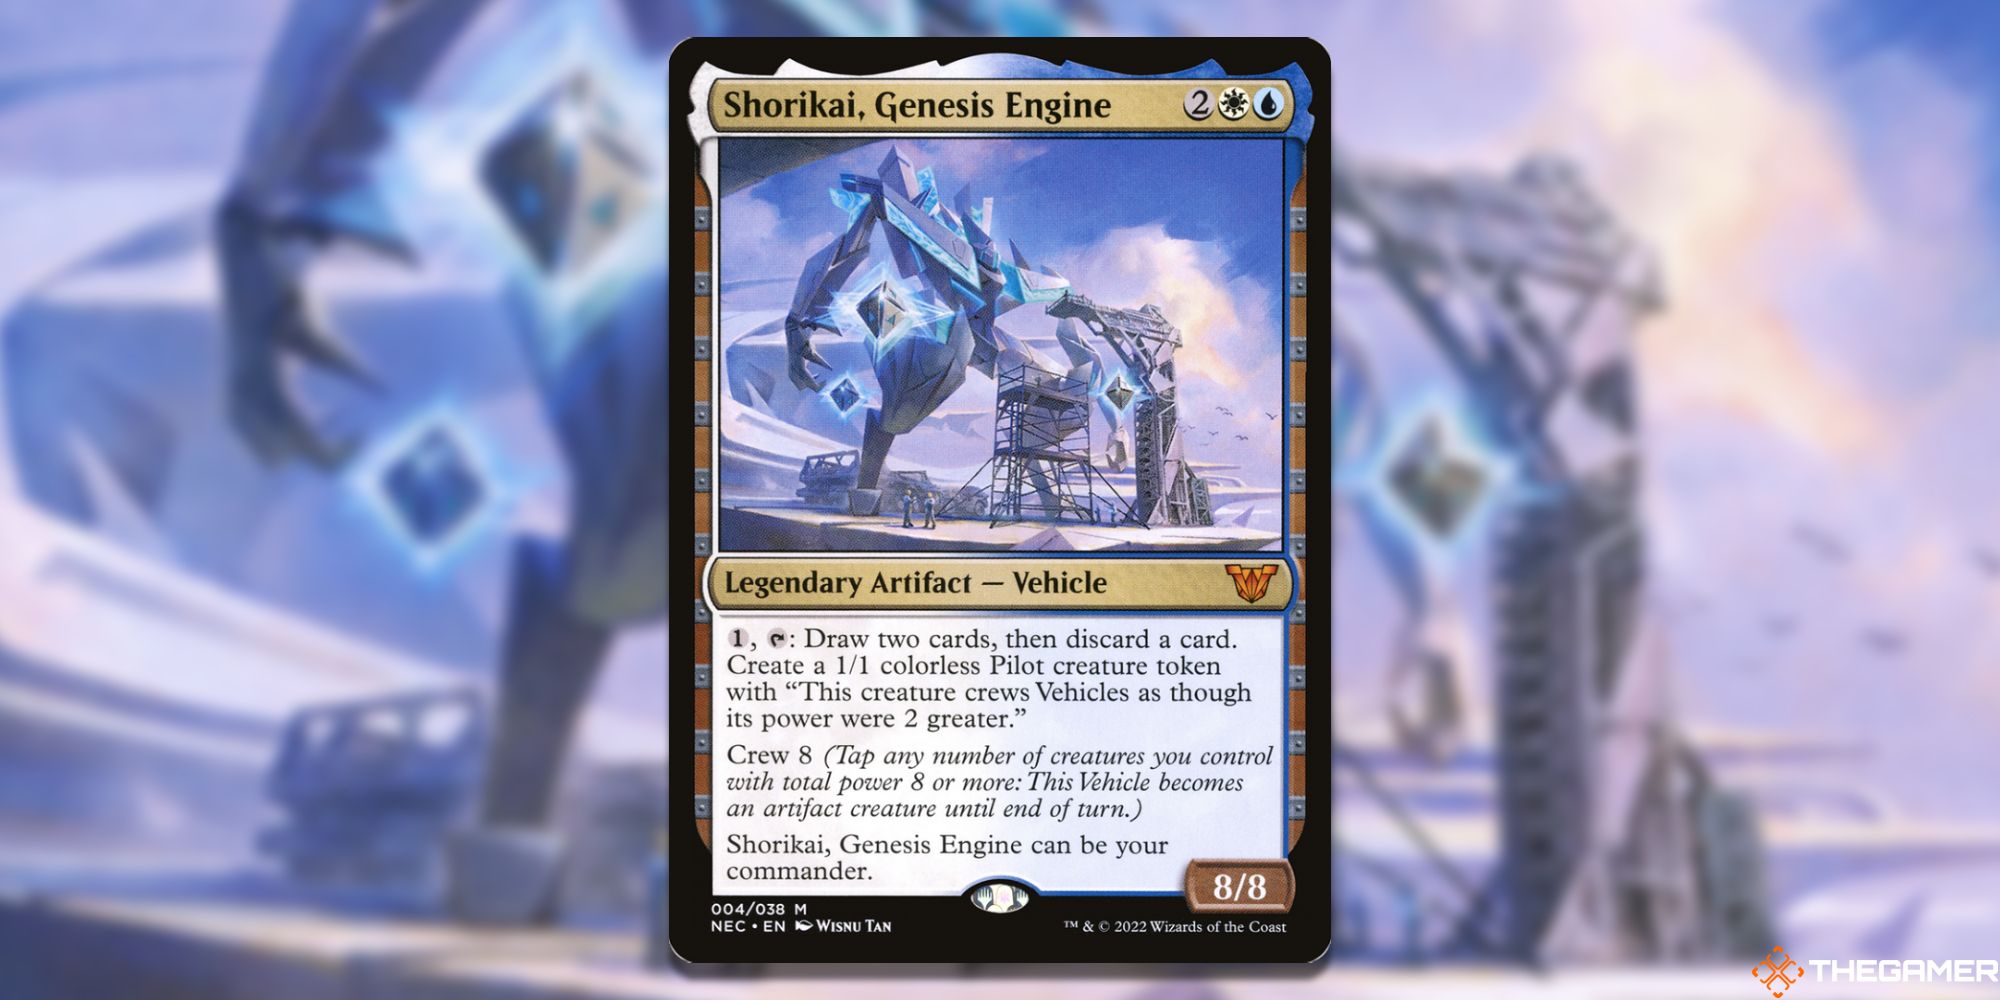 Image of the Shorikai, Genesis Engine card in Magic: The Gathering, with art by Wisnu Tan